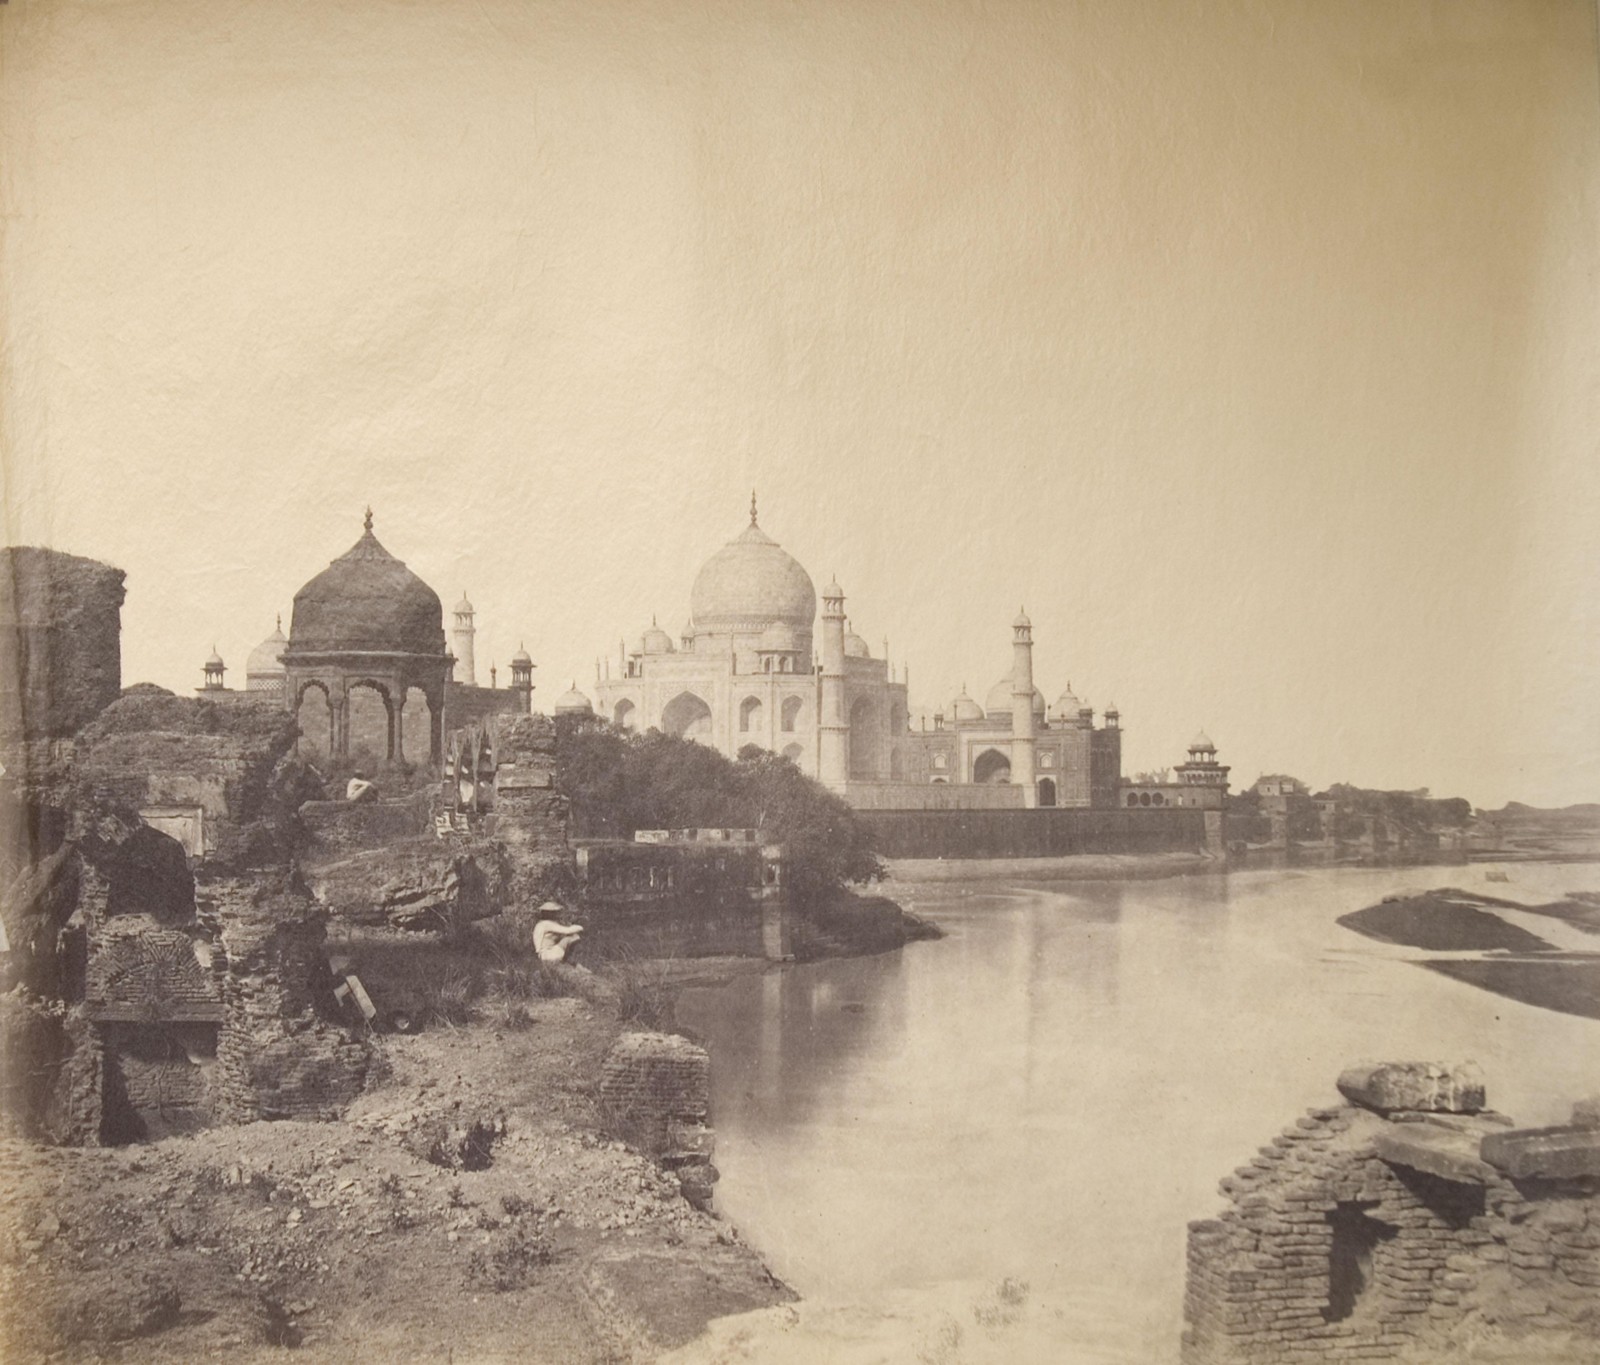 Dr. John Murray's images of the Taj Mahal are recognized as the first-ever photographs of the monument. The surgeon, who was employed with the East India Company, took the pictures between 1858 and 1862